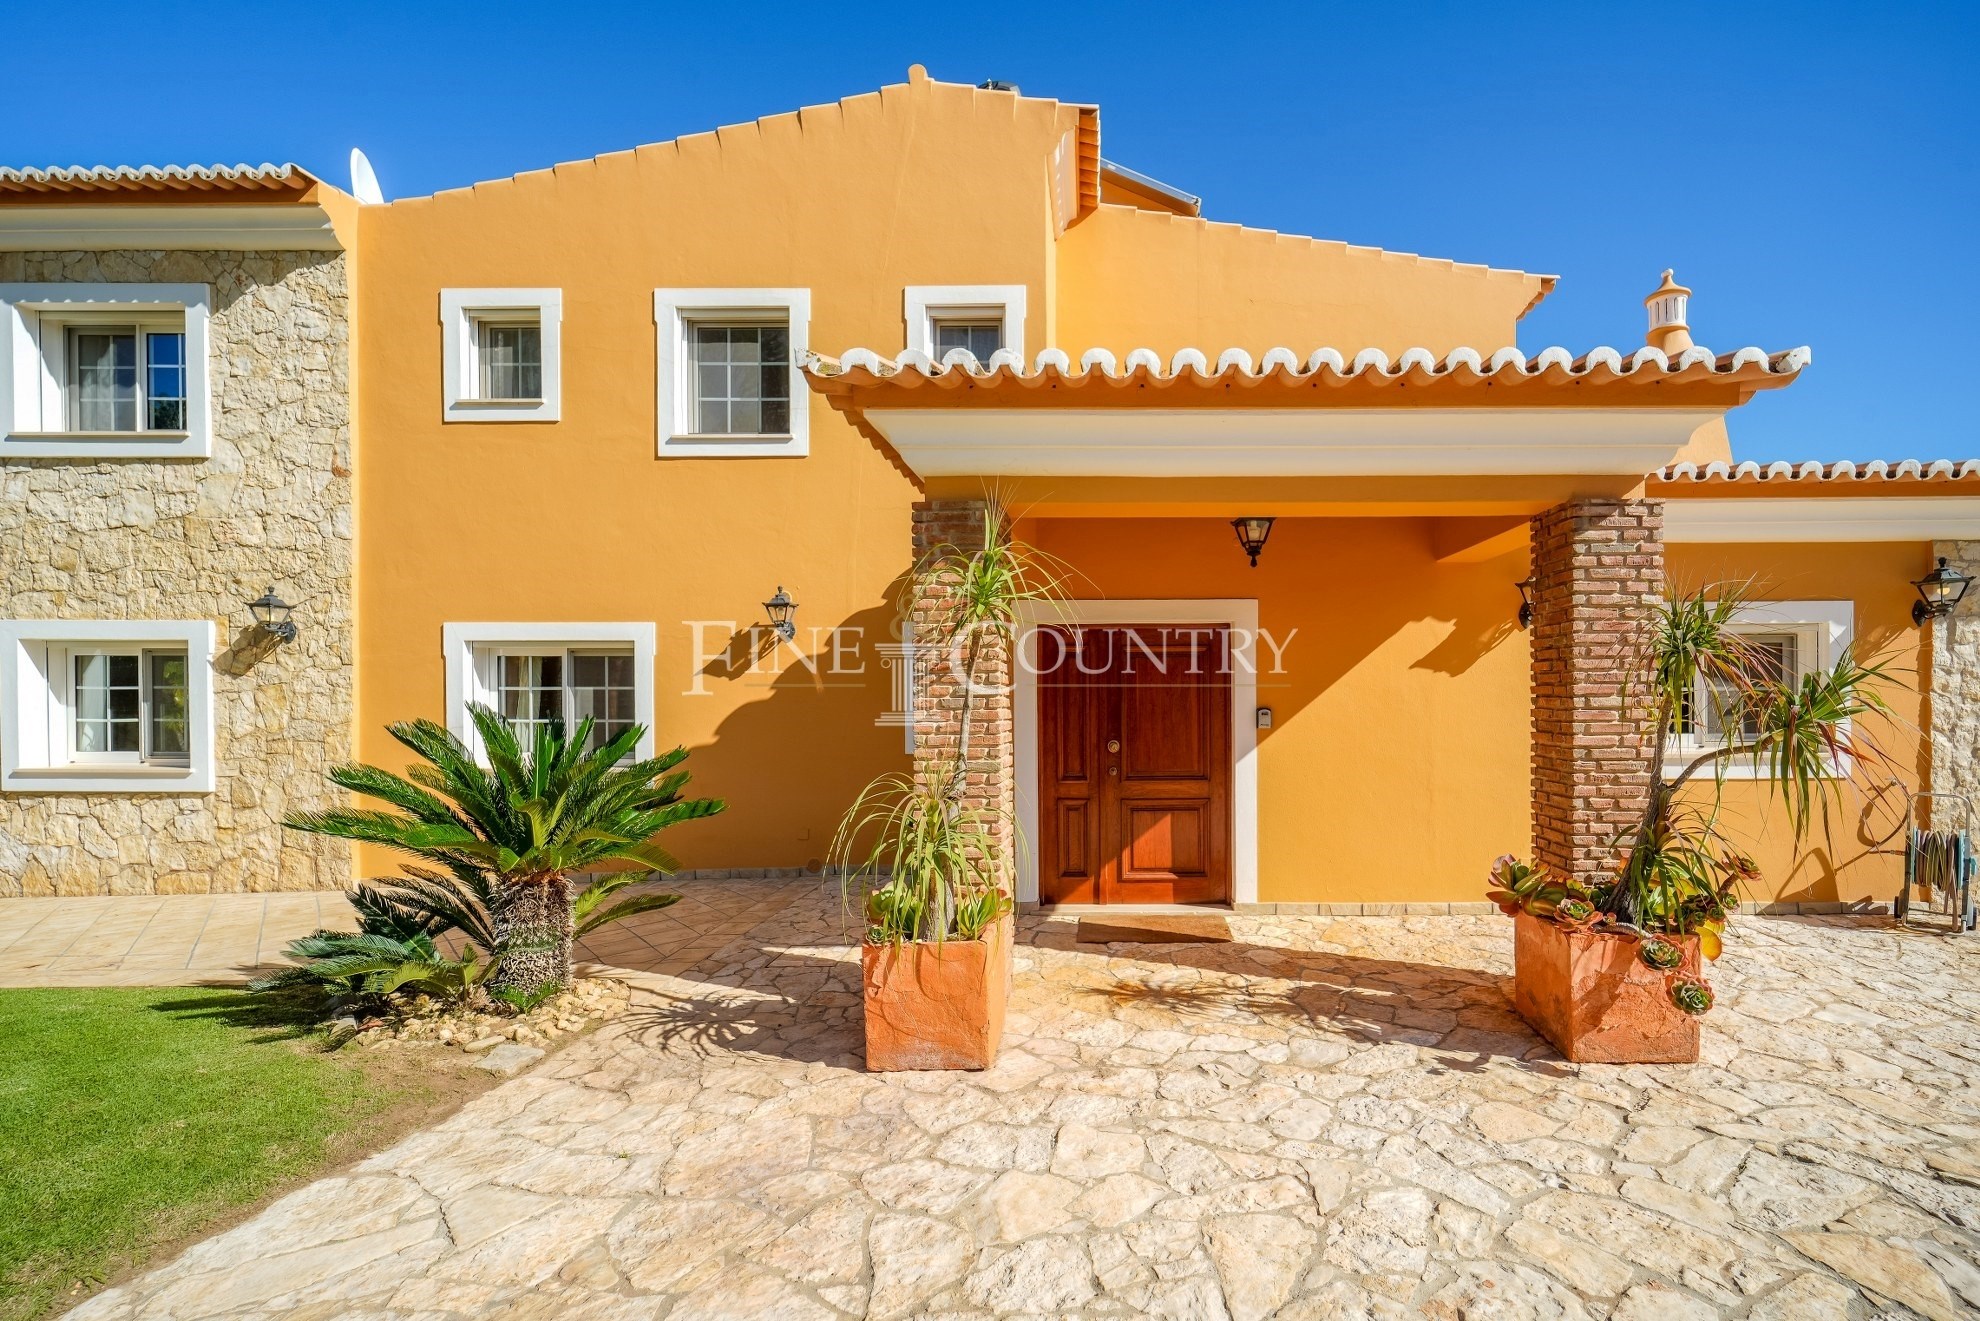 Photo of Carvoeiro - Beautiful 4-bedroom villa with sea and country views